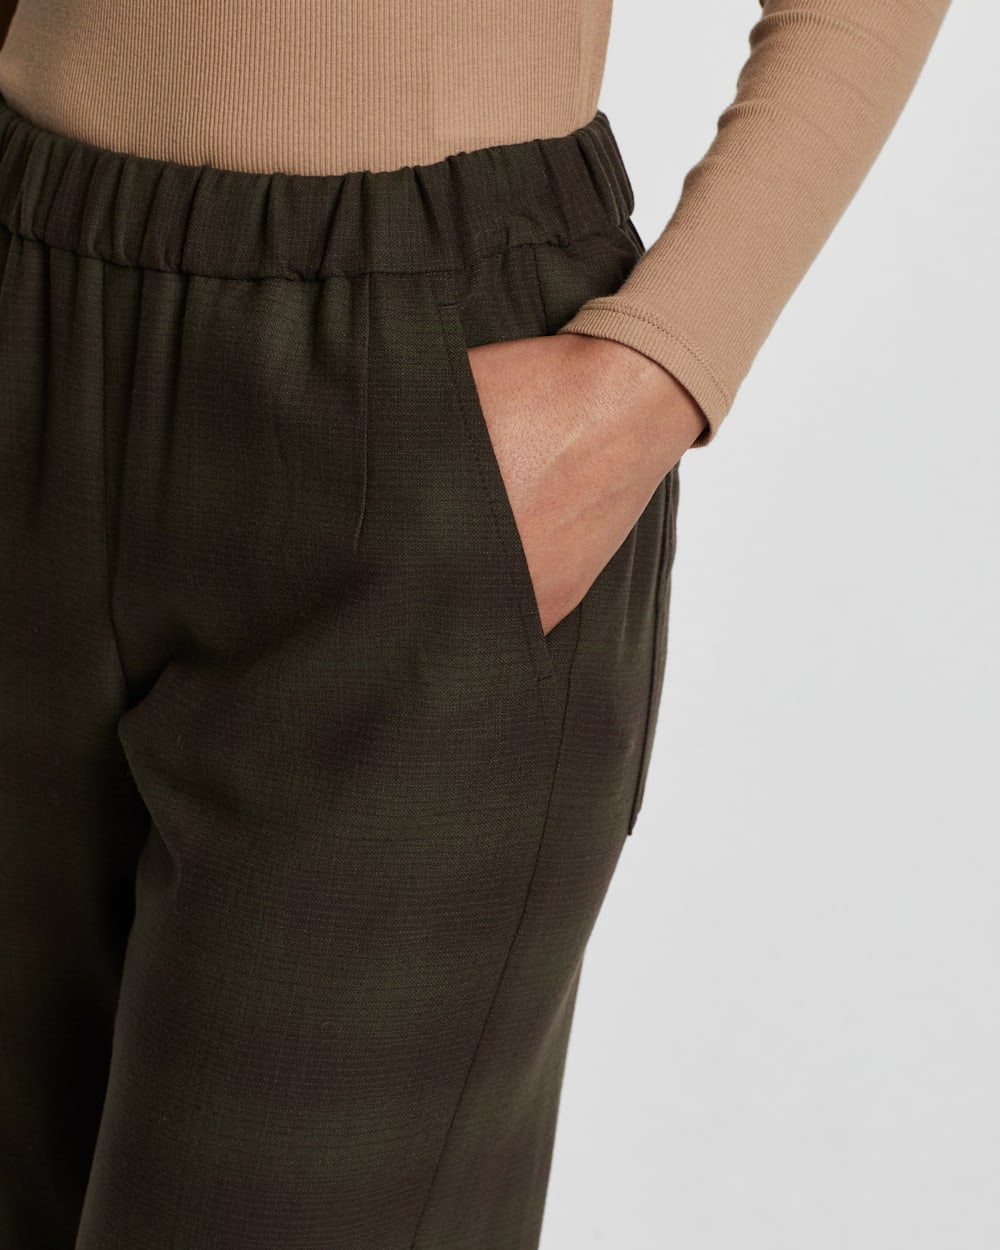 ALTERNATE VIEW OF WOMEN'S BROADWAY MERINO PLAID PANTS IN OLIVE SHADOW image number 5